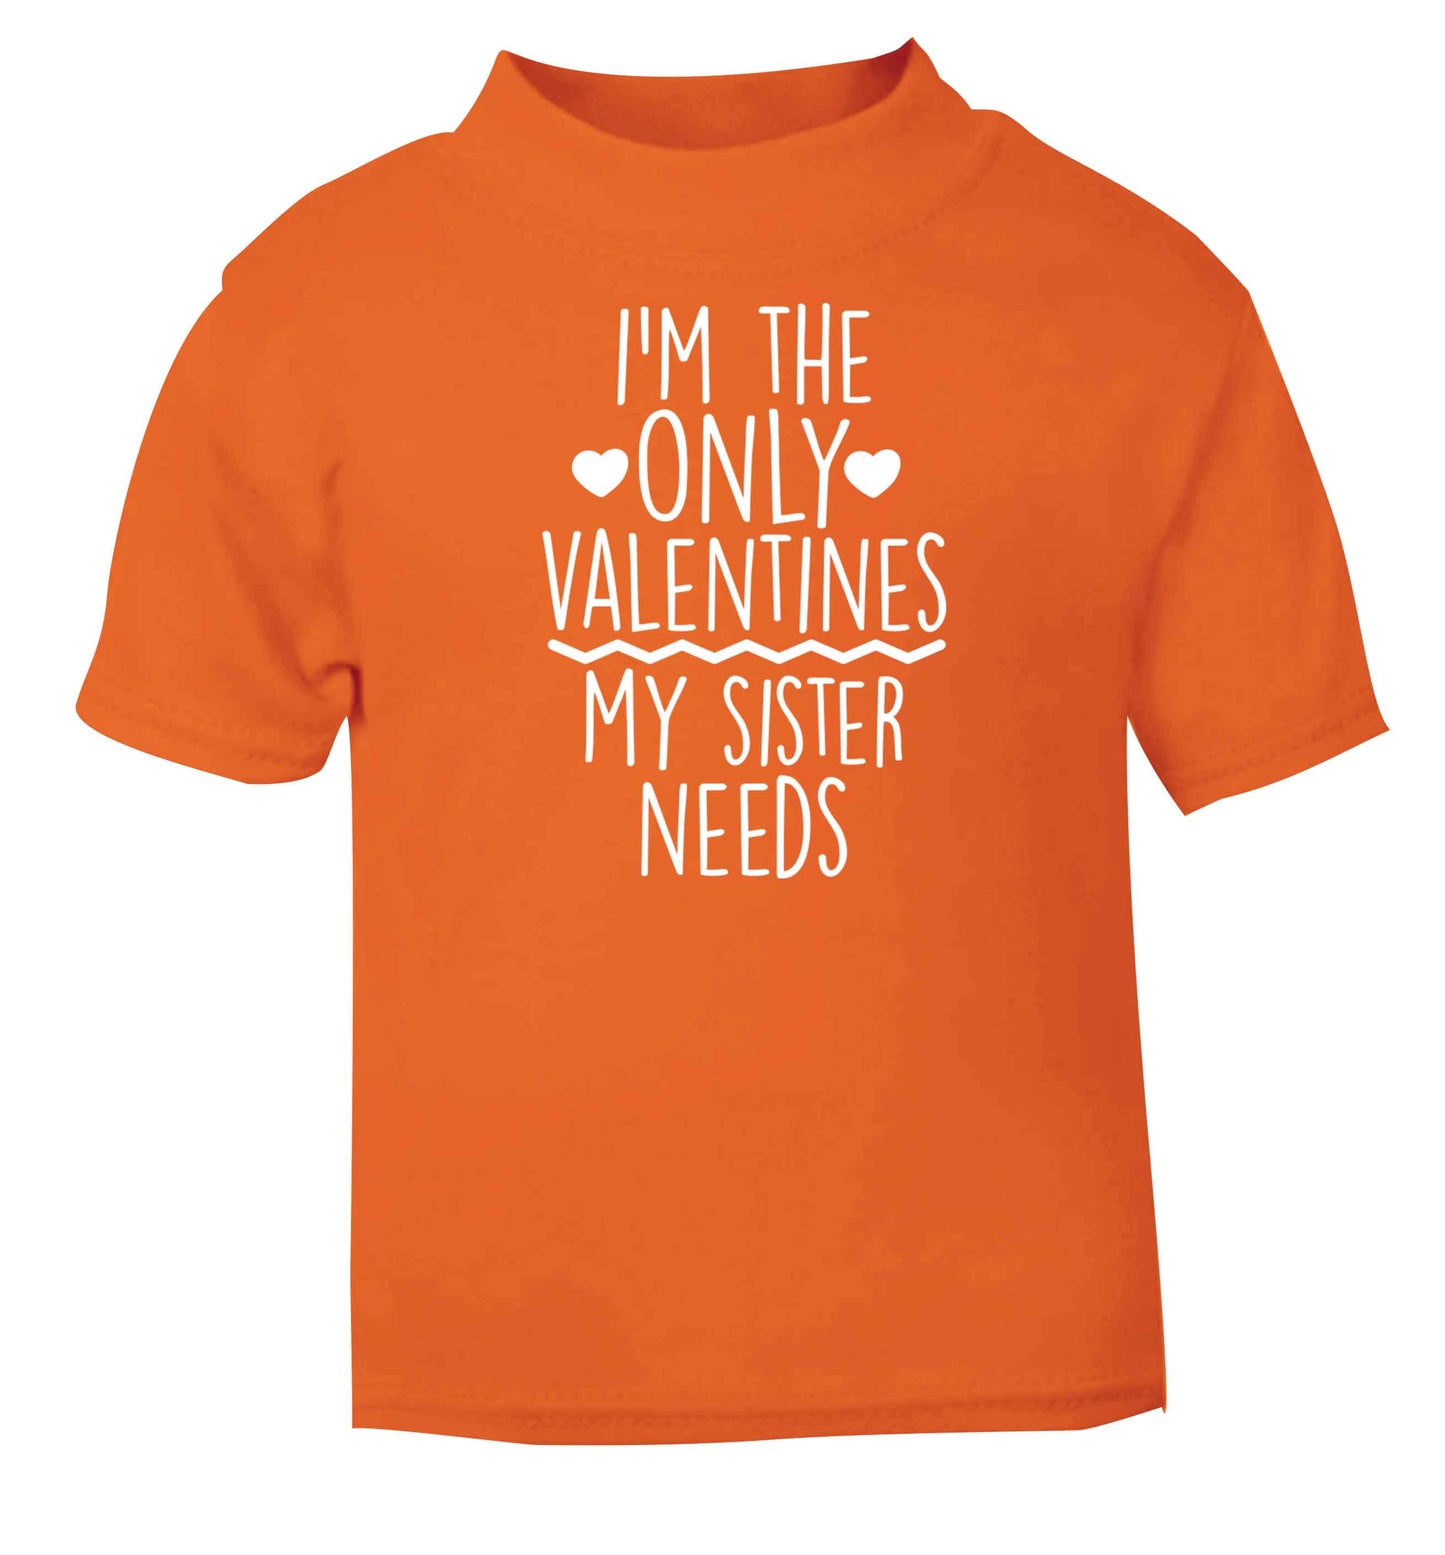 I'm the only valentines my sister needs orange baby toddler Tshirt 2 Years